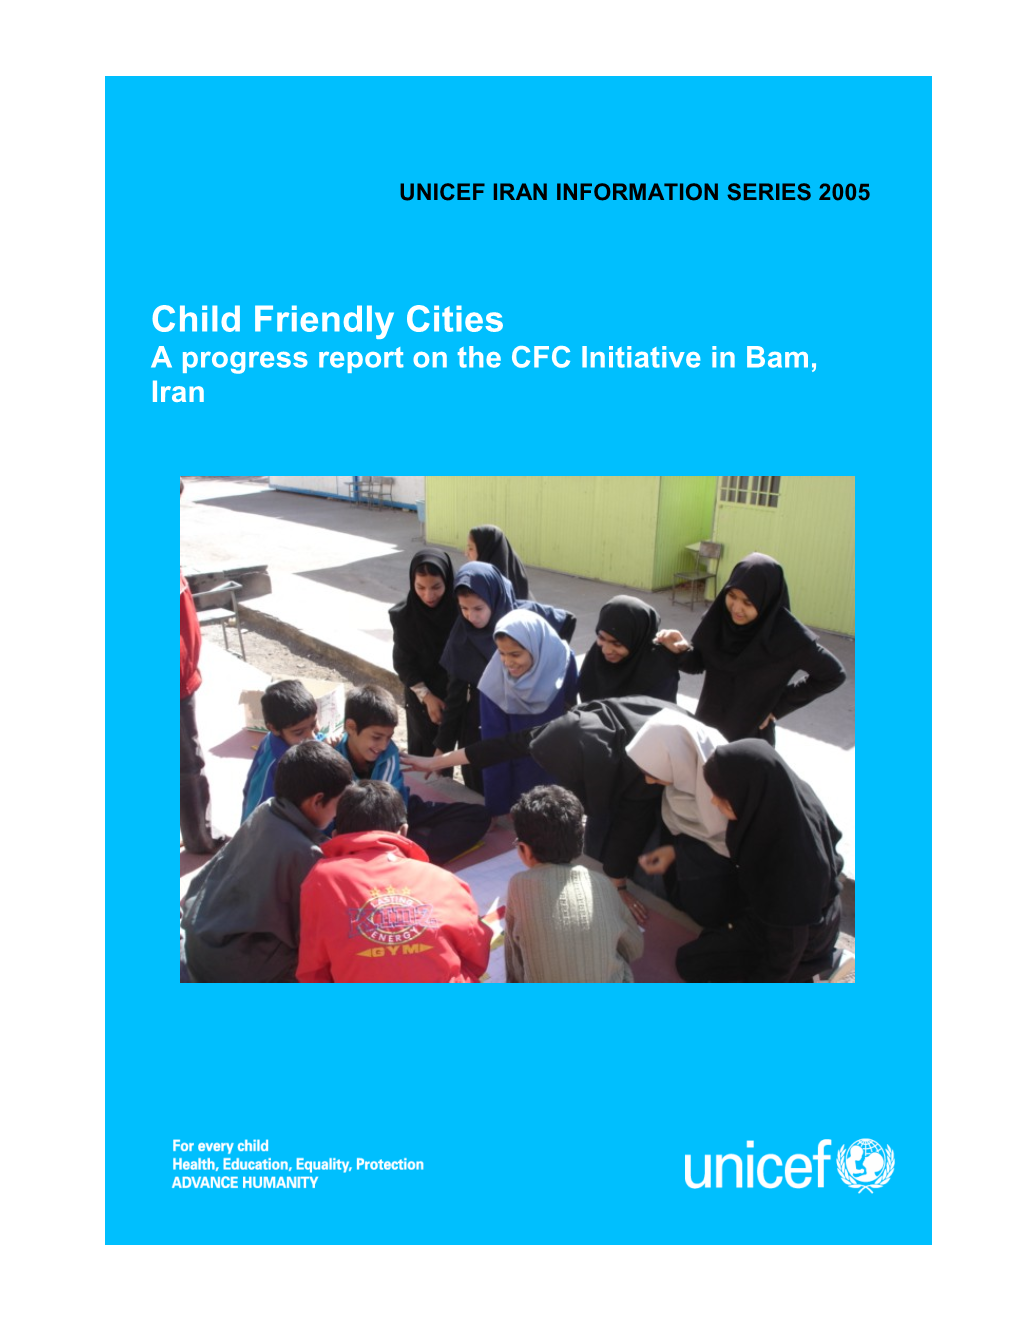 Progress Report on the Child Friendly Cities Initiative in Bam, Iran